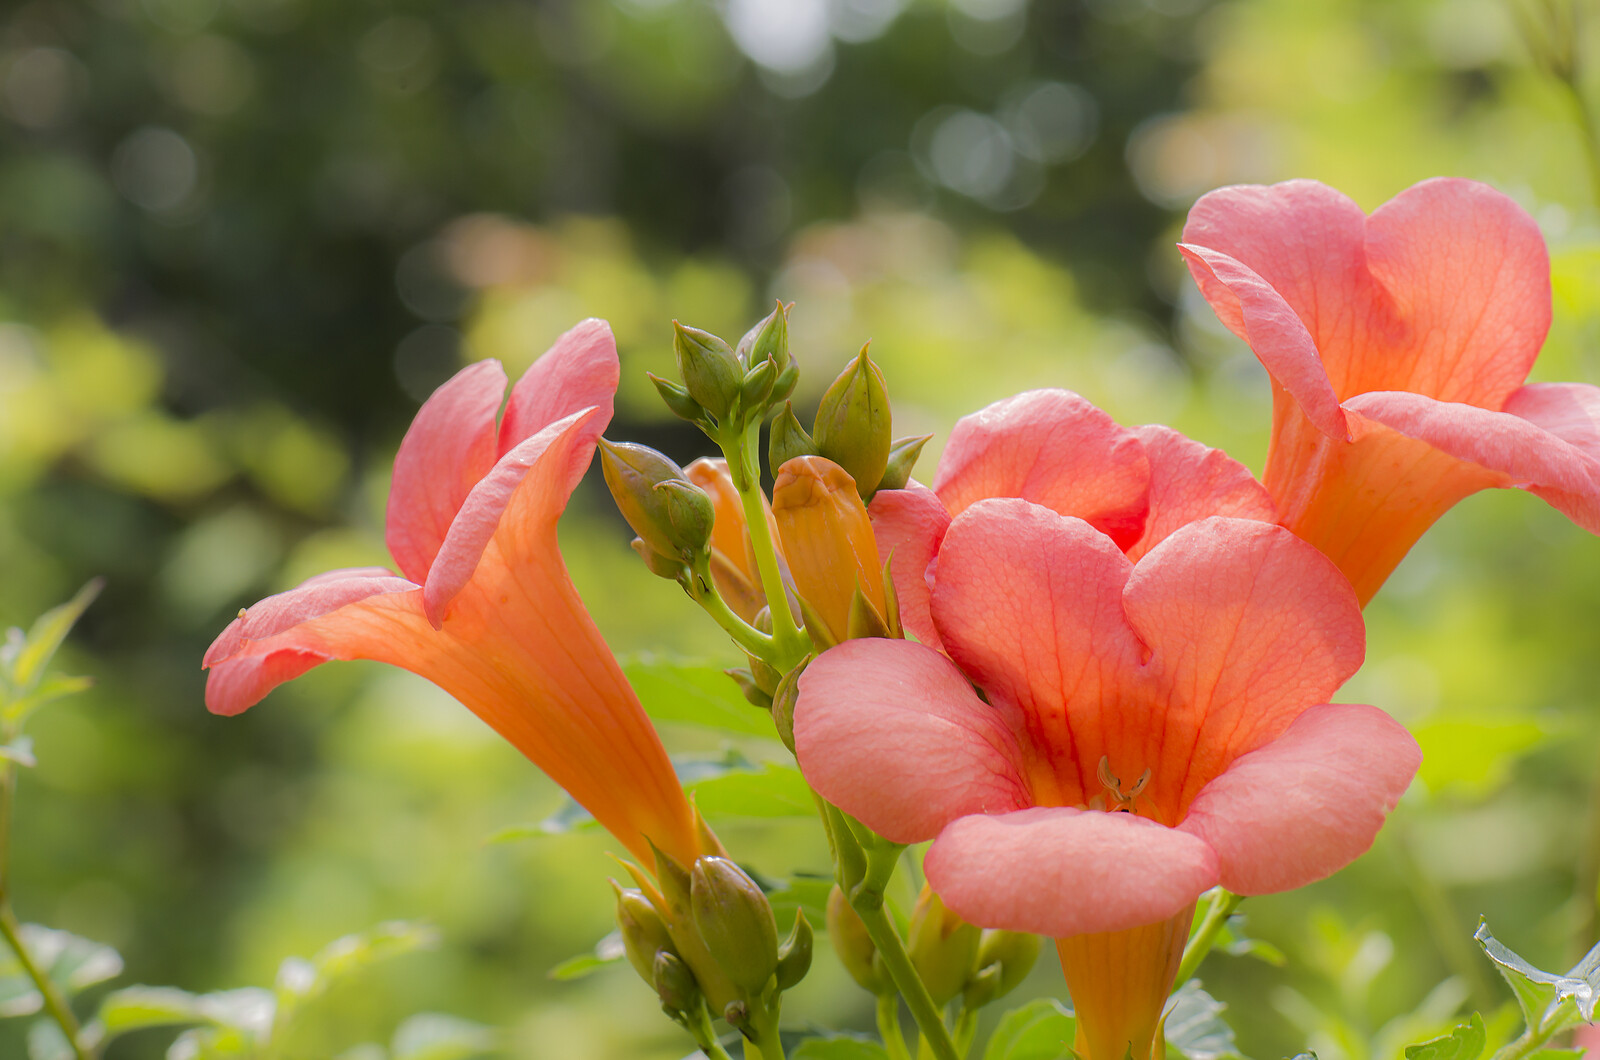 Chinese Trumpet Flowers in a Garden